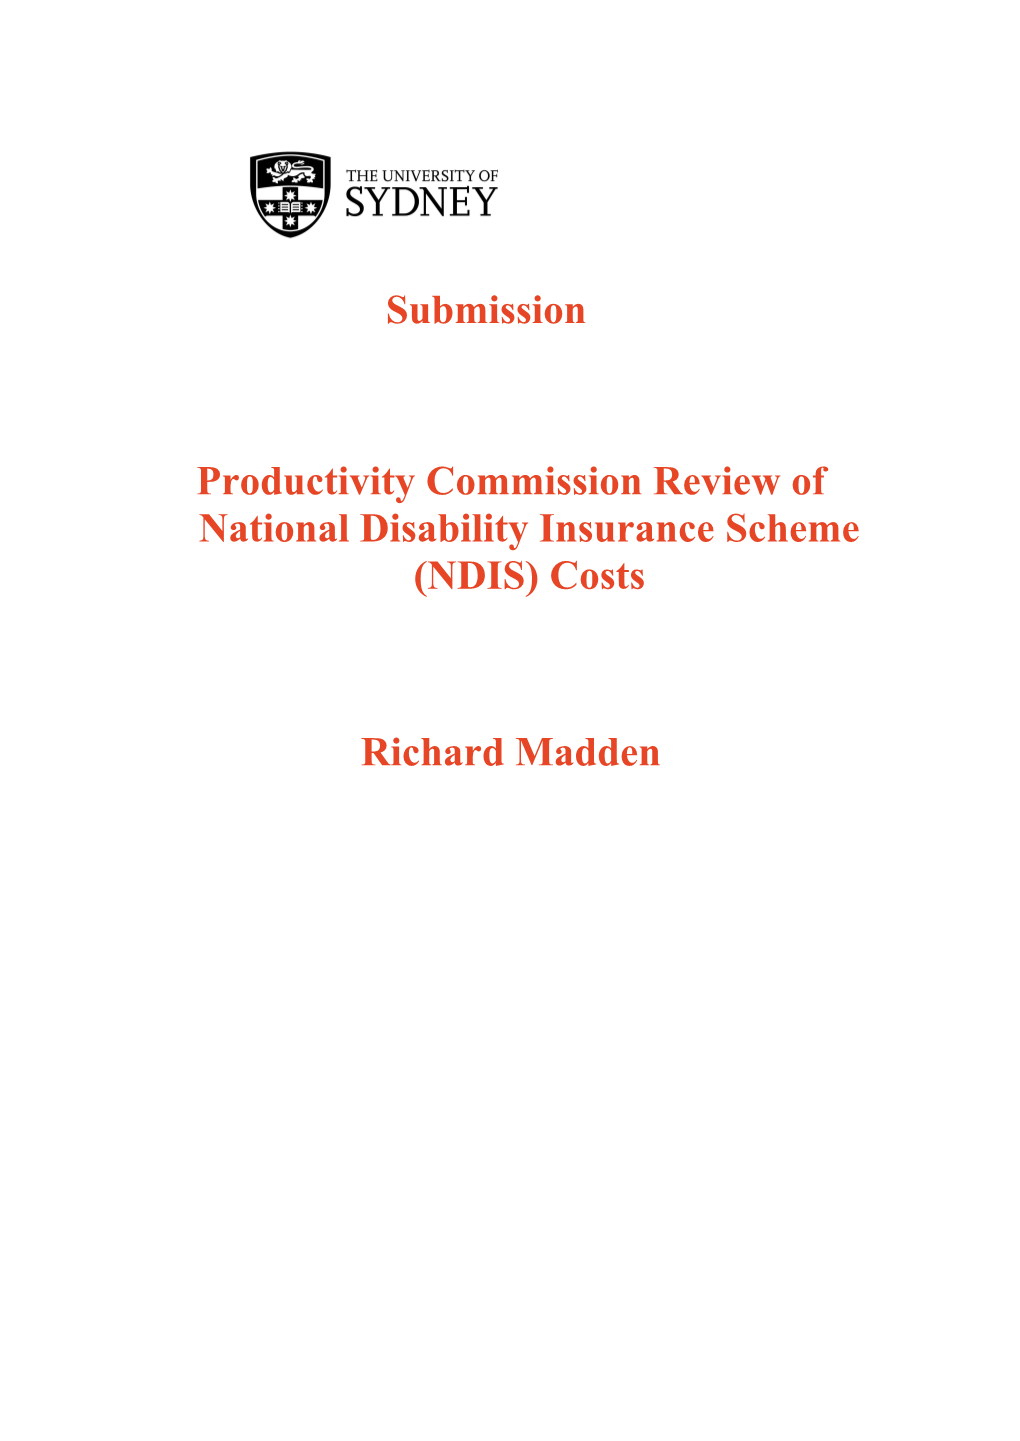 Submission 101 - Richard Madden - National Disability Insurance Scheme (NDIS) Costs